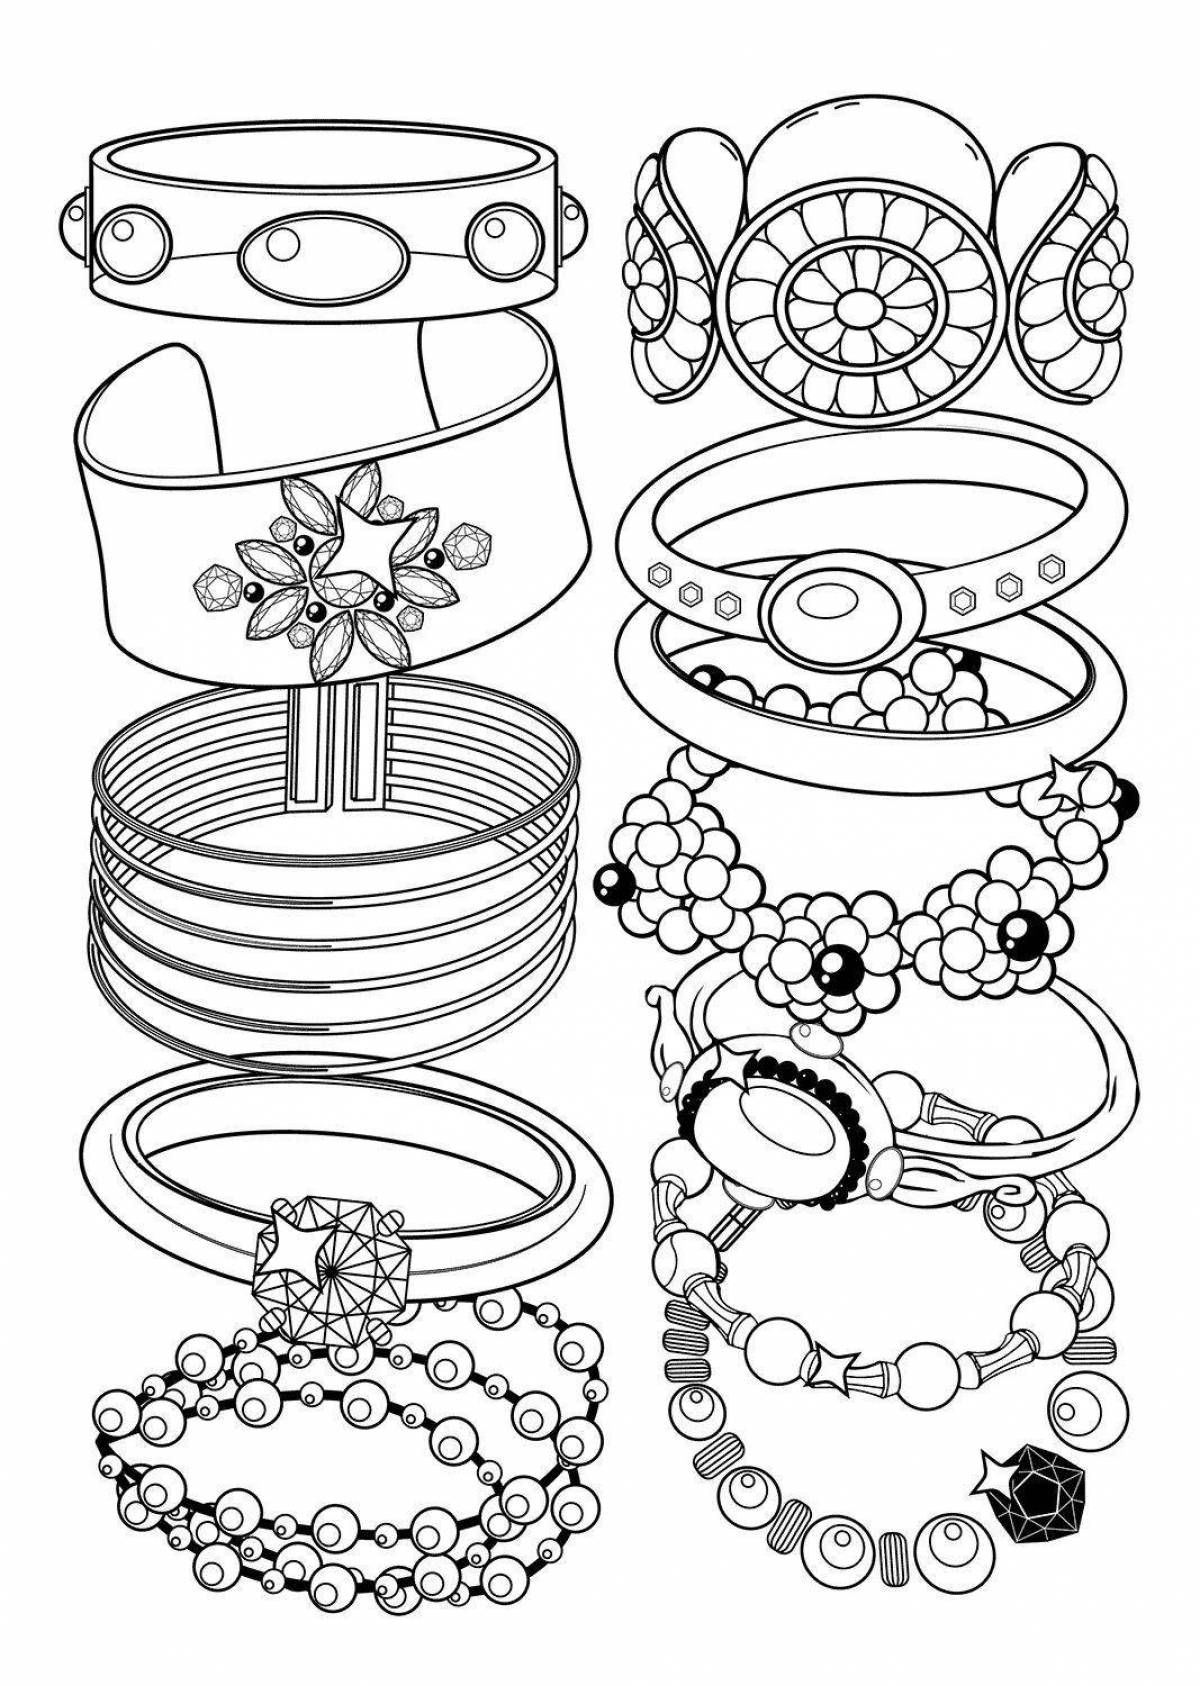 Coloring page elegant jewelry